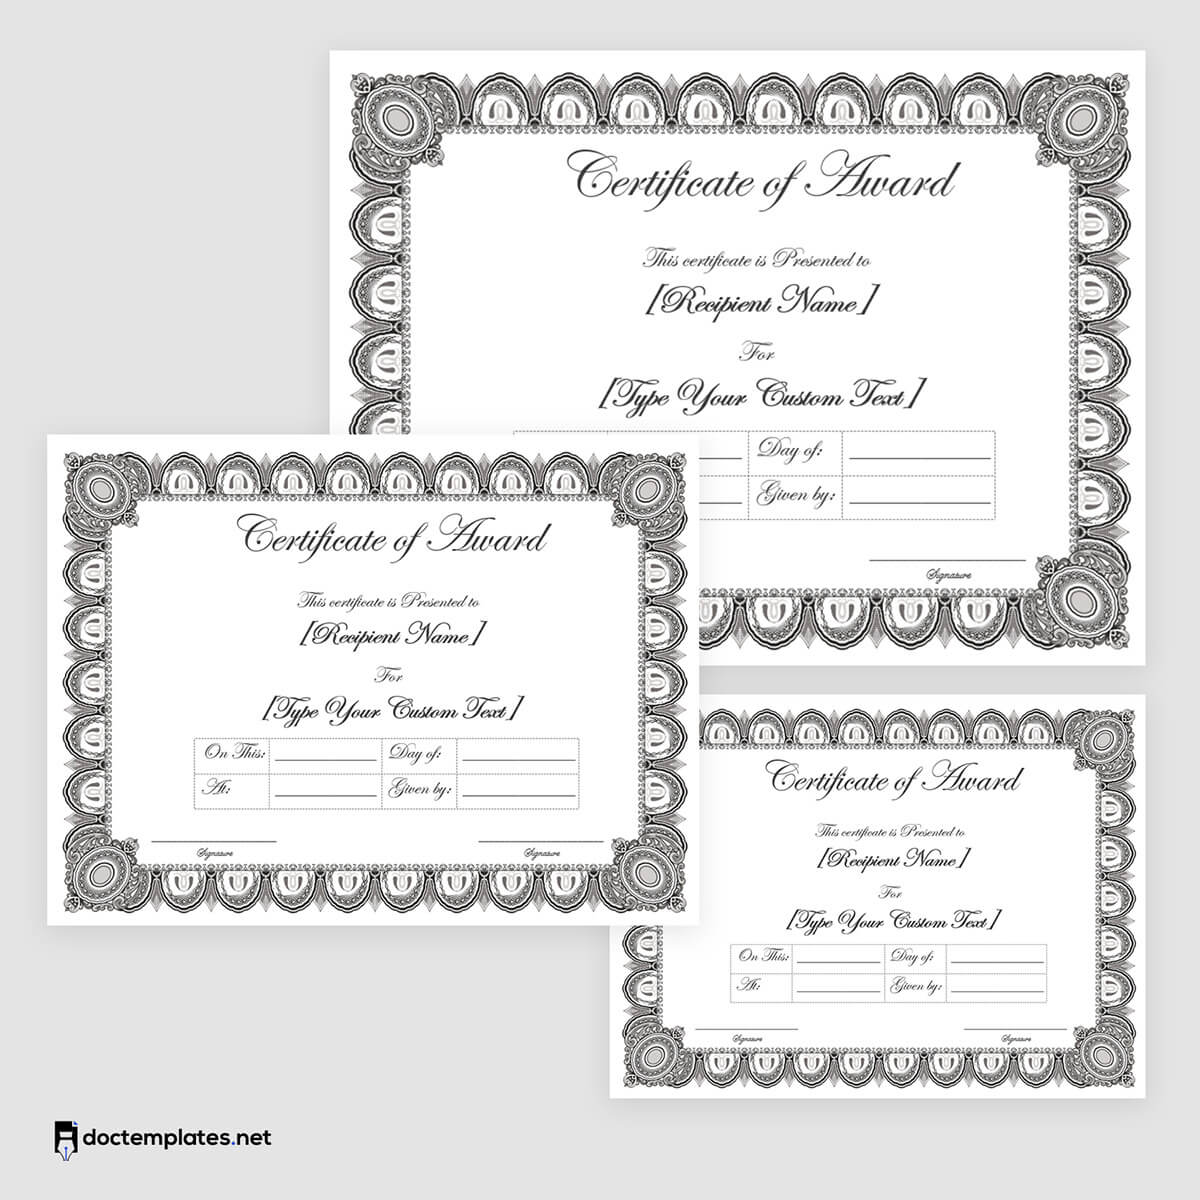 
safety award certificate template free download 01